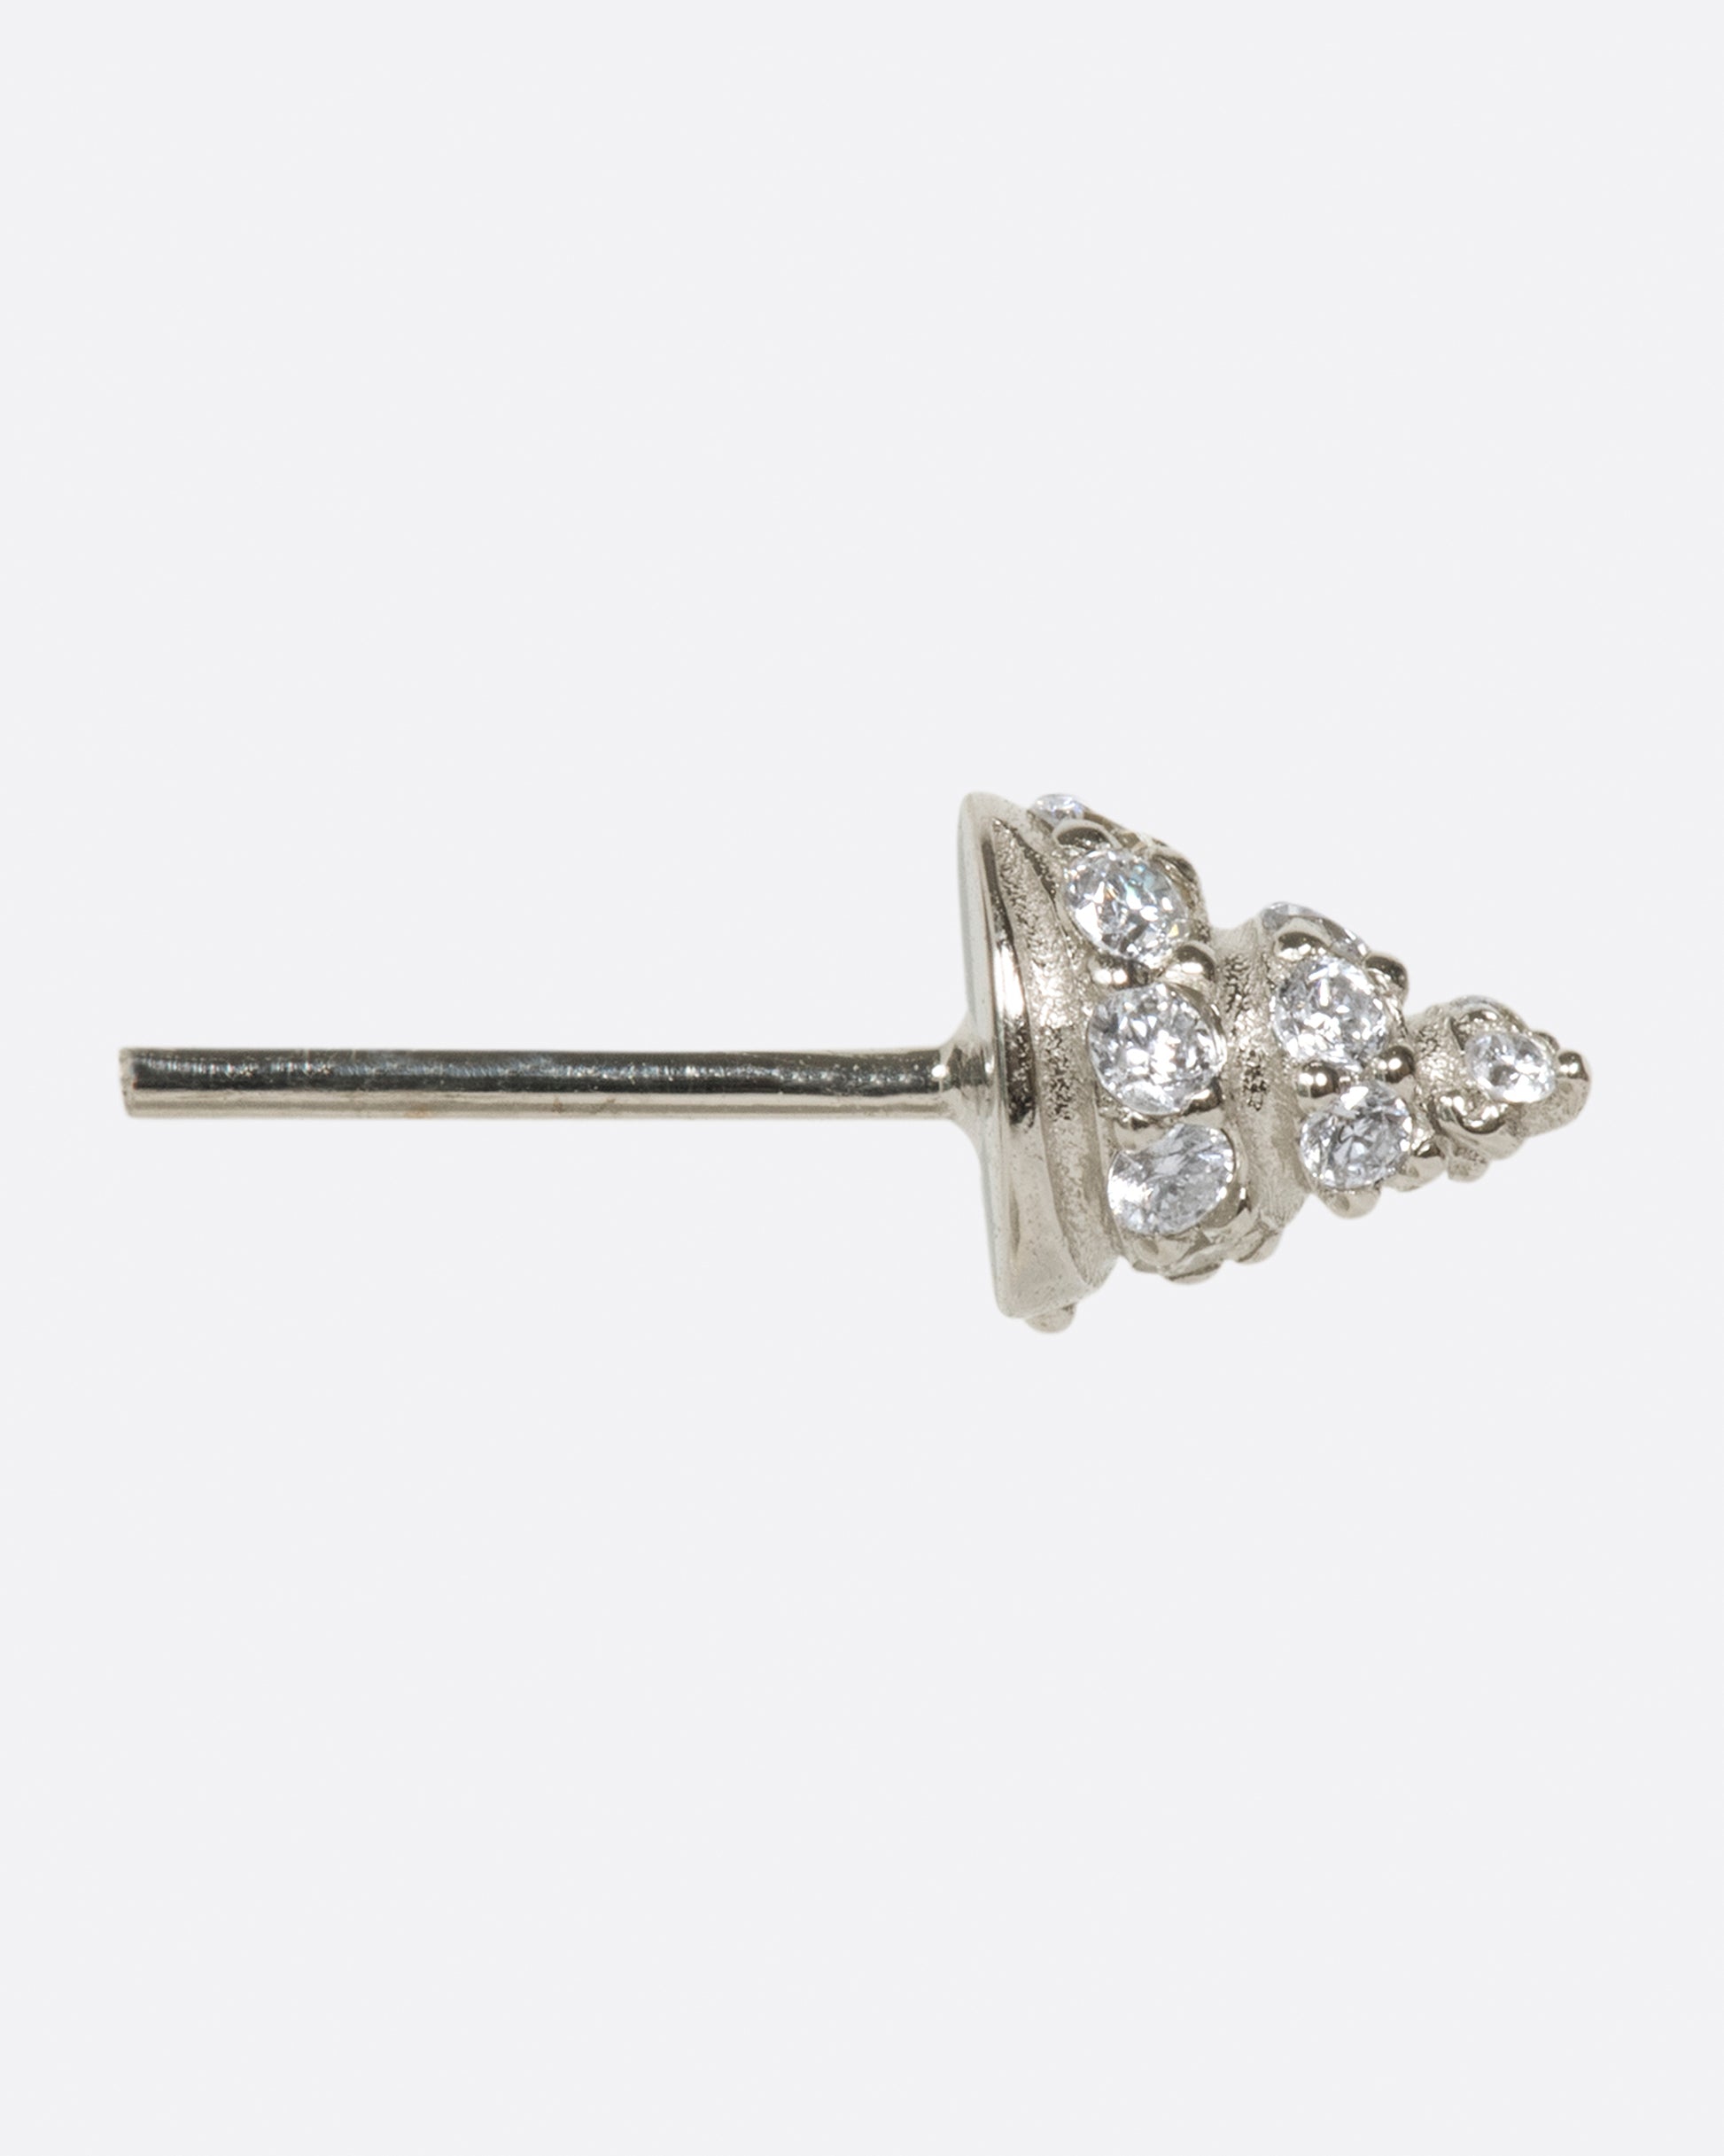 A pointed stud, in your choice of gold, with diamonds wrapped around it.